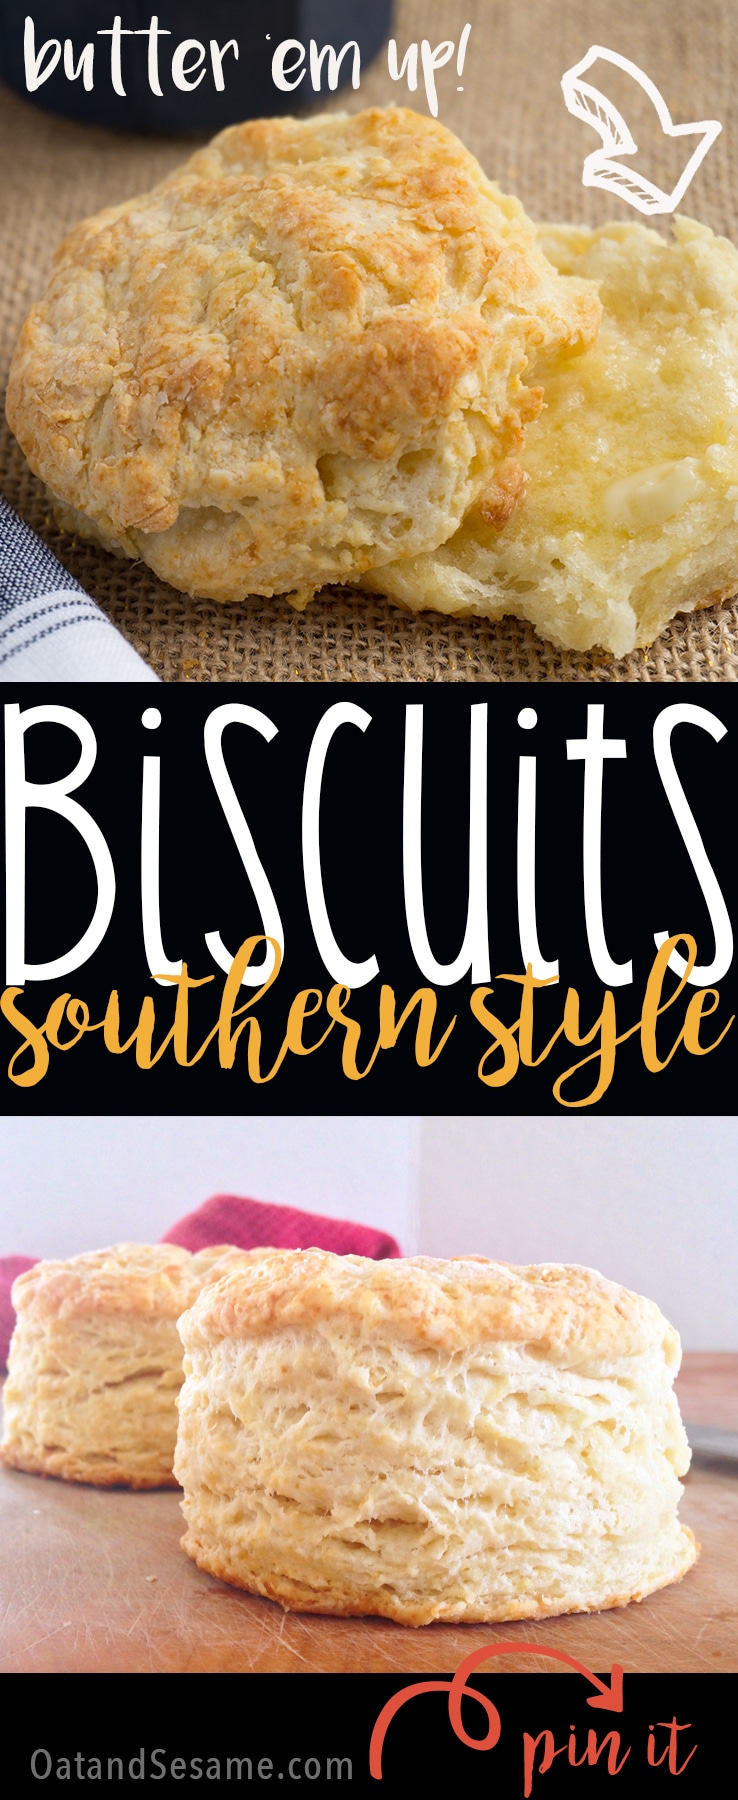 Traditional Southern Buttermilk Biscuits - Oat&Sesame